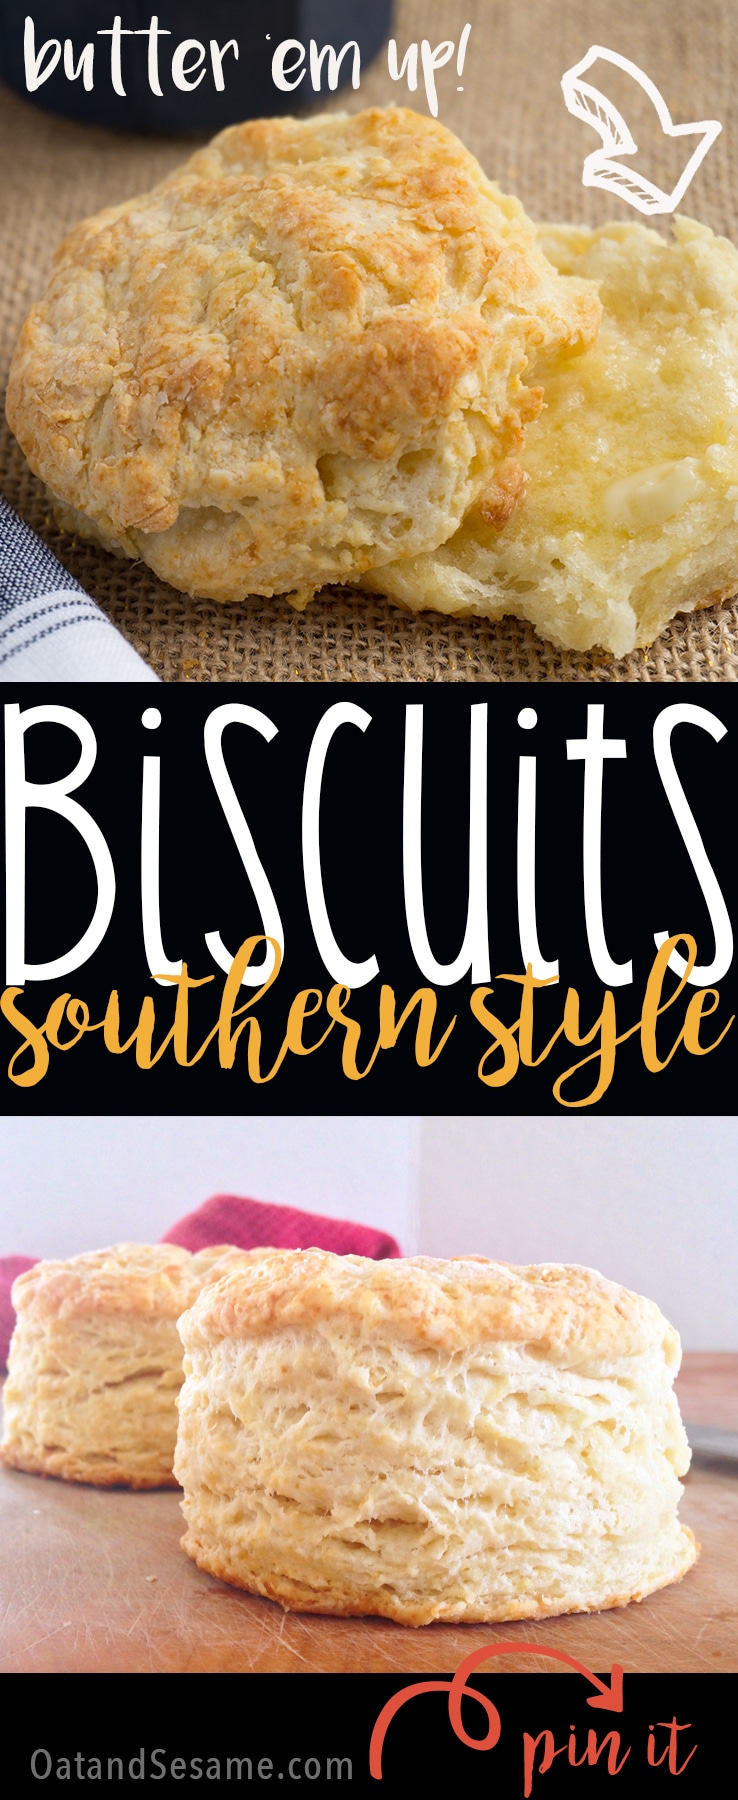 Traditional Southern Buttermilk Biscuits - Oat&Sesame